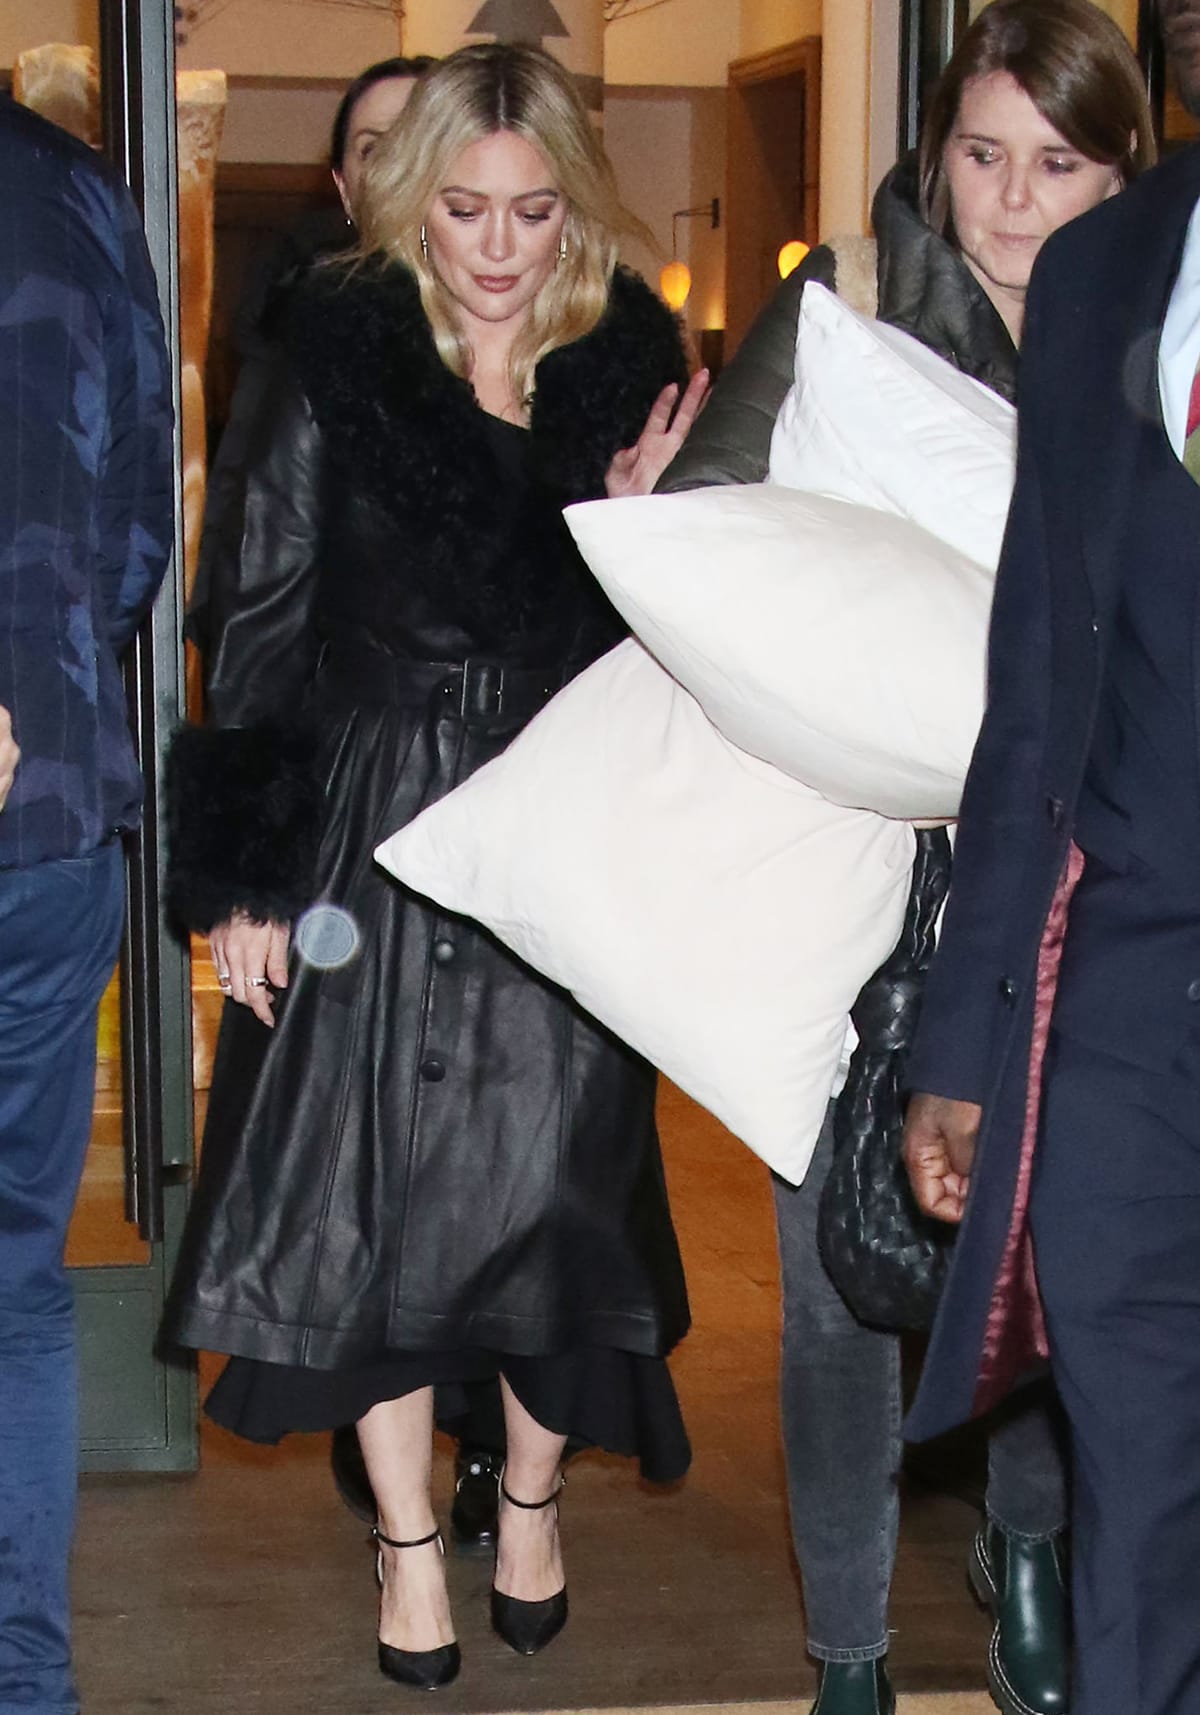 Hilary Duff hides her asymmetrical black dress underneath a black leather coat with fur cuffs and collar